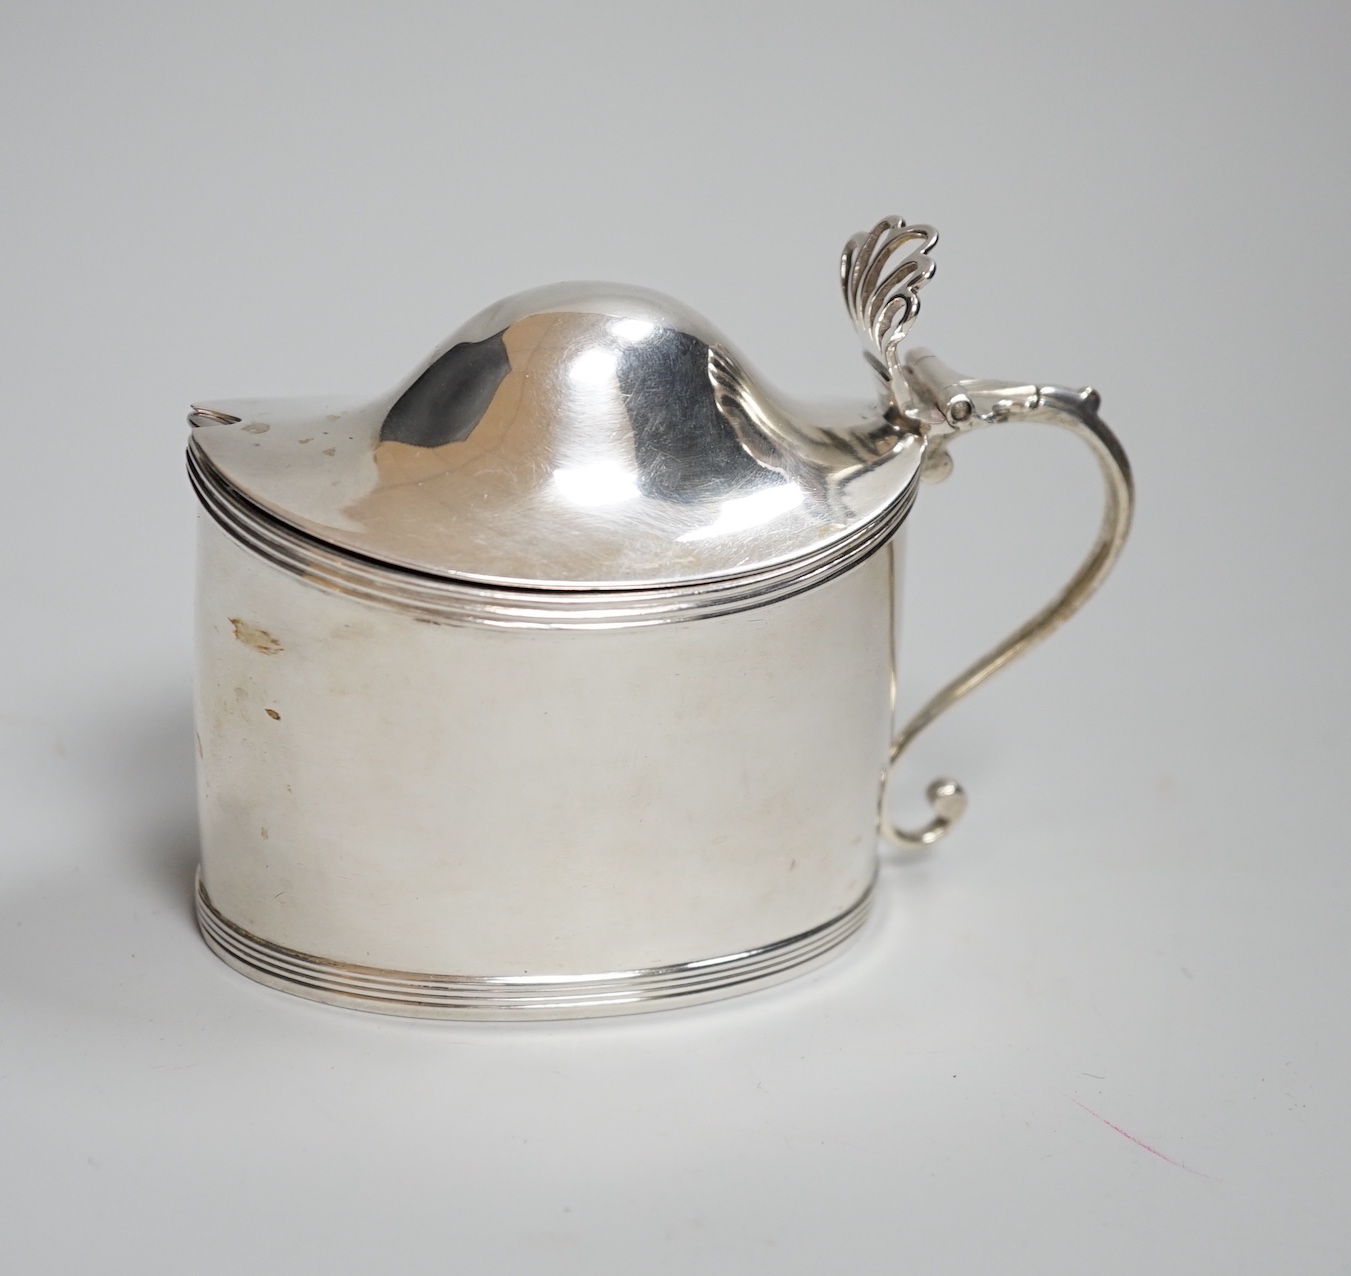 A George III oval silver drum mustard, with domed cover, glass liner and plated spoon, makers Peter, Anne and William Bateman, London 1800, 121 grams                                                                       